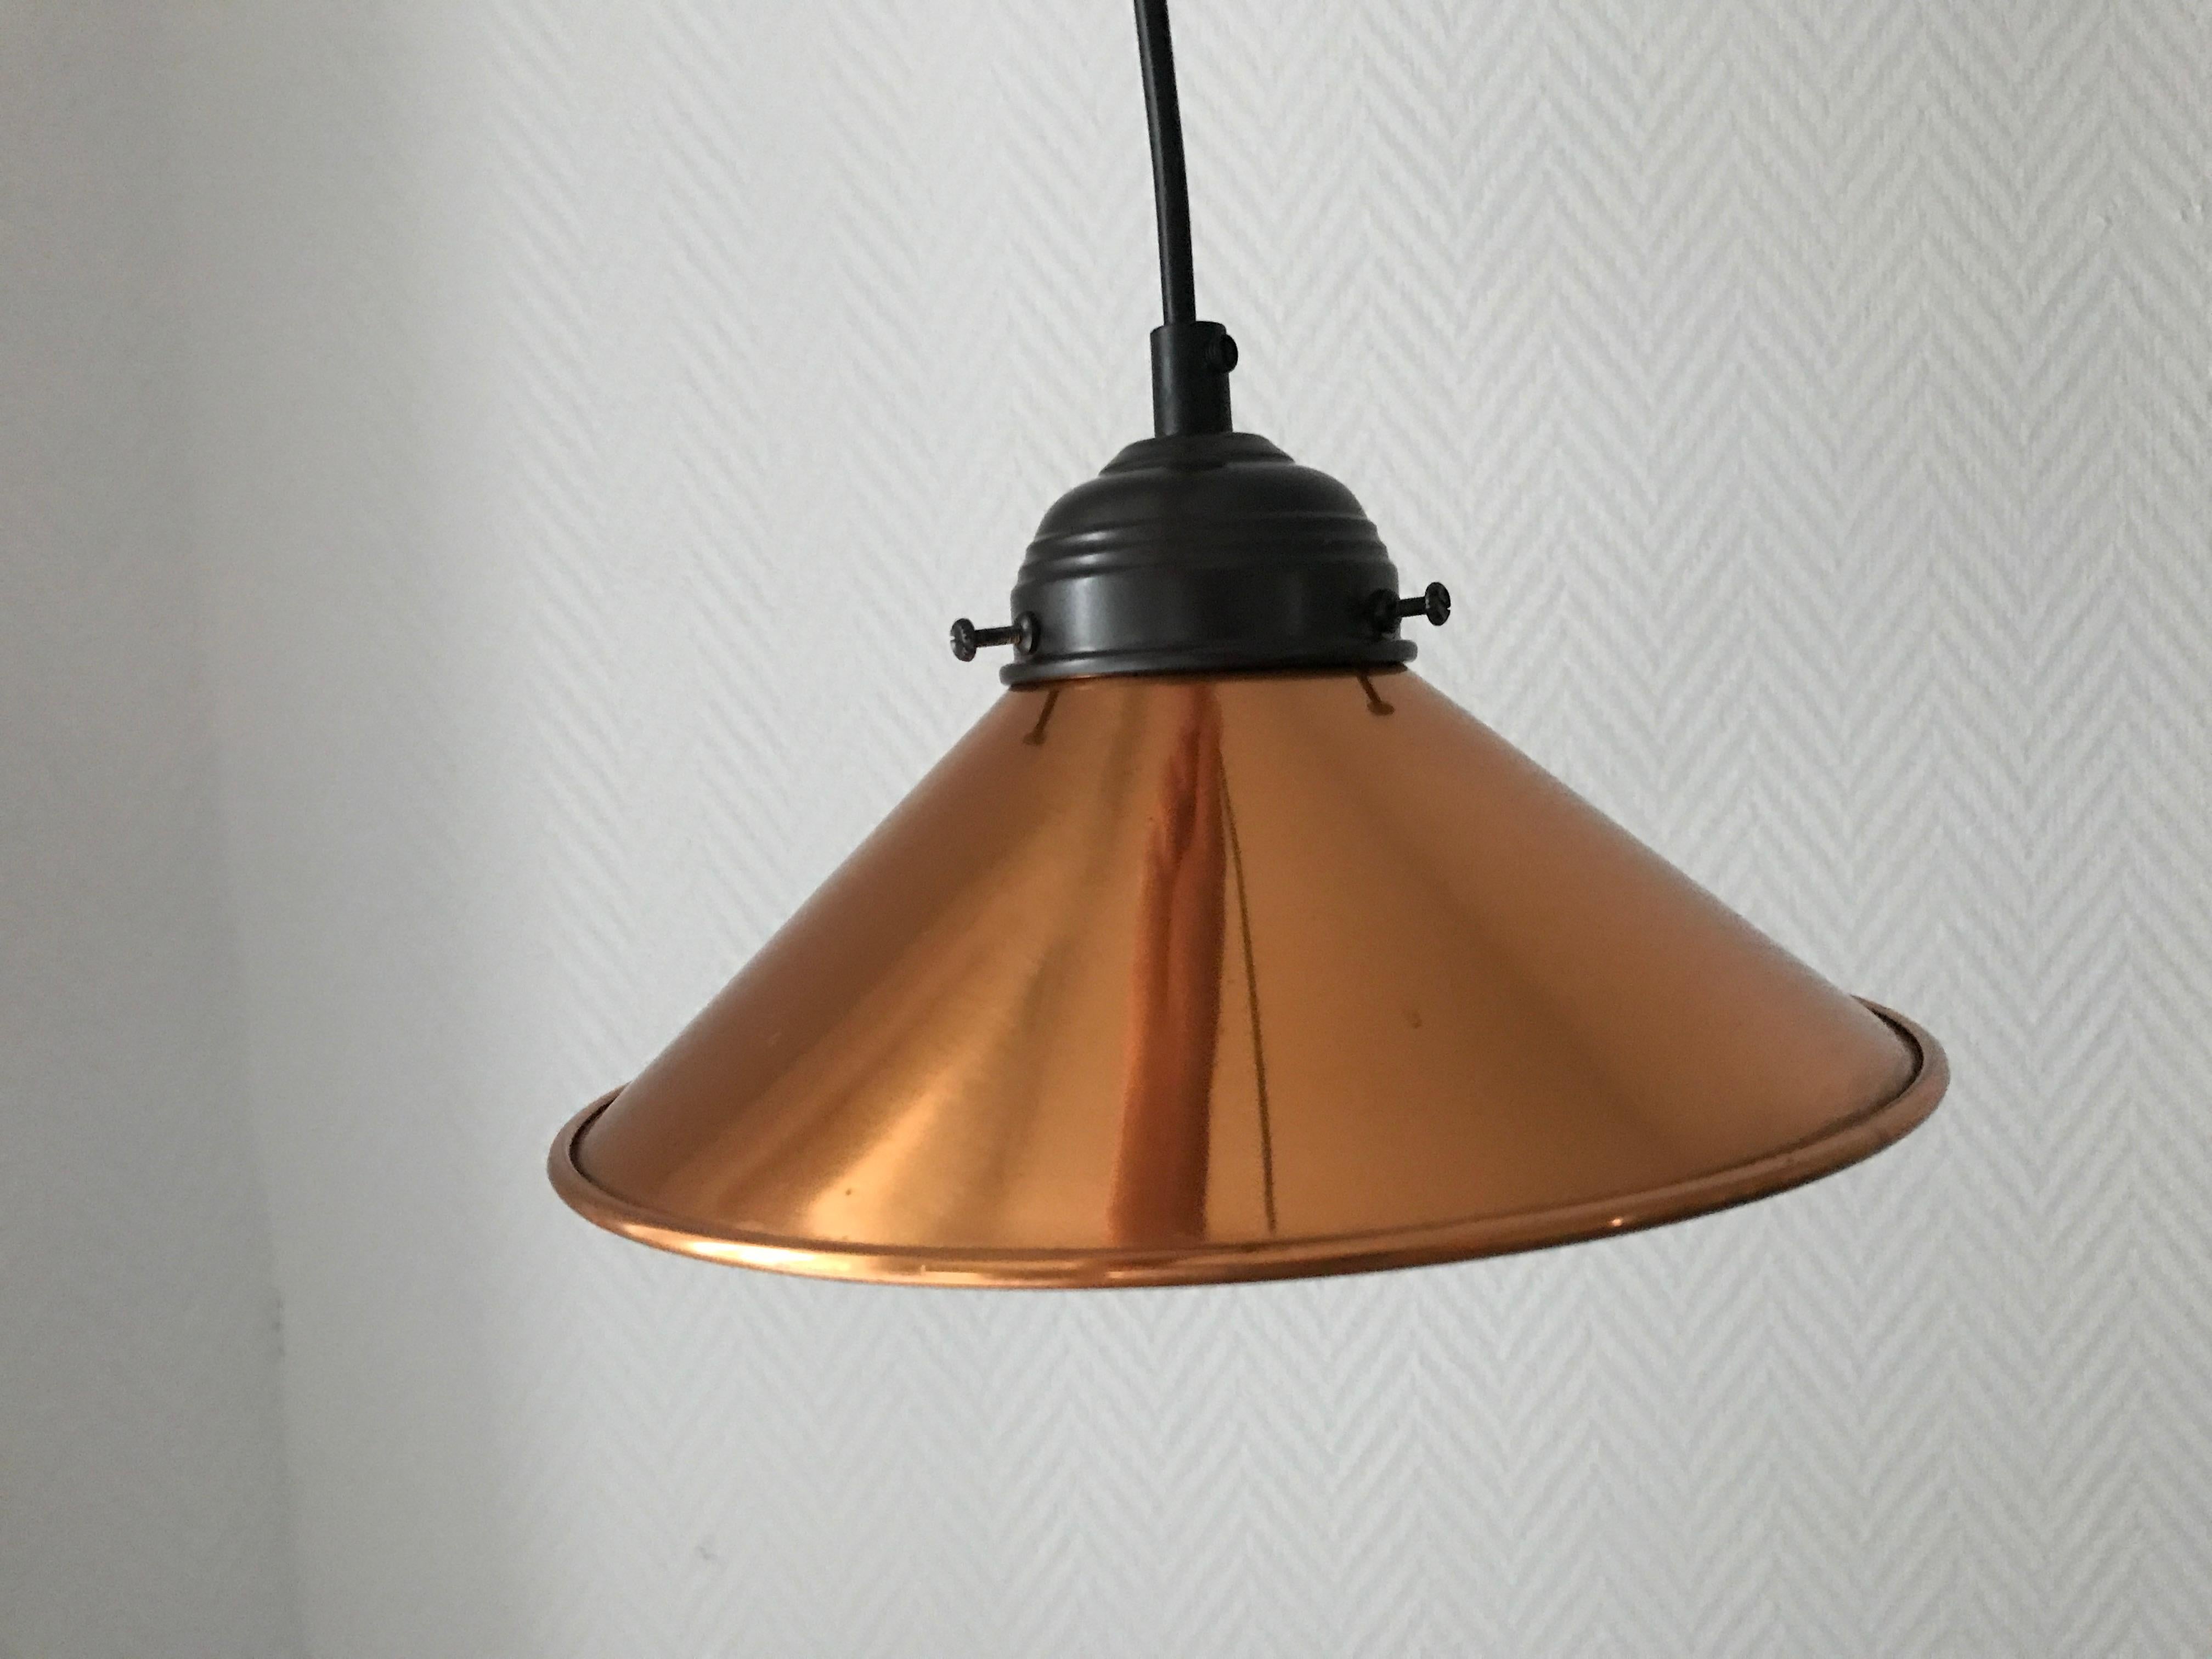 Vintage Mid-Century Scandinavian Modern pendants with polished copper outer surface in conical shape. FREE SHIPPING! Set of three pendants. Shade holder in dark grey/black patinated brass. 300 cm rounded black pvc cable with E27 bulb holder in brass